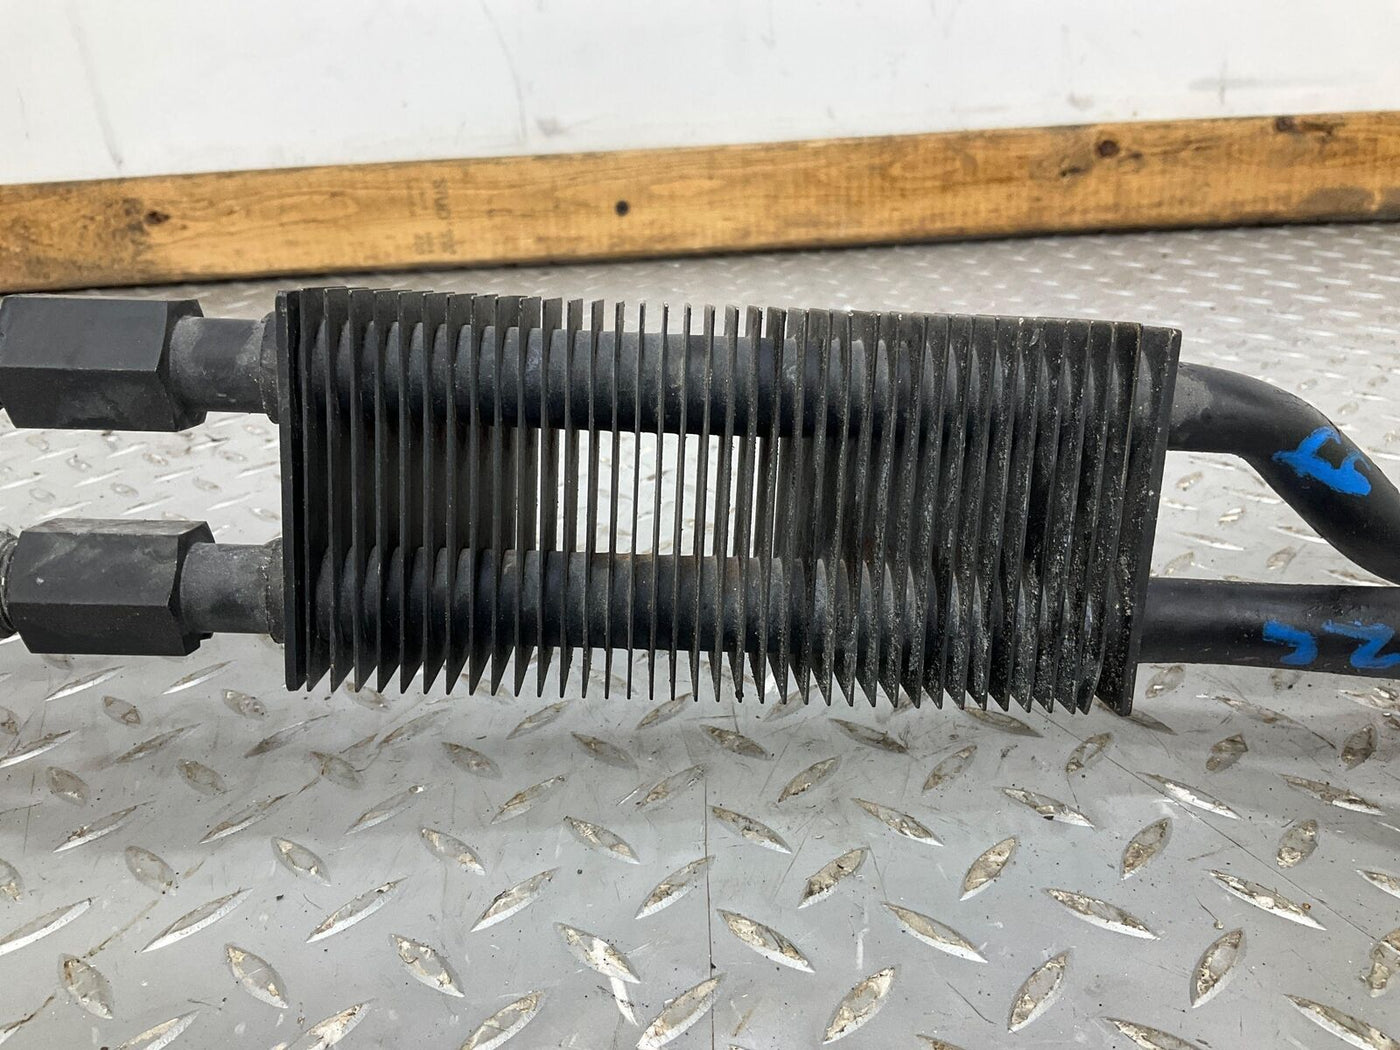 89-93 Toyota Supra MK3 Power Steering Cooler (Has a Light Bend - See Photos)